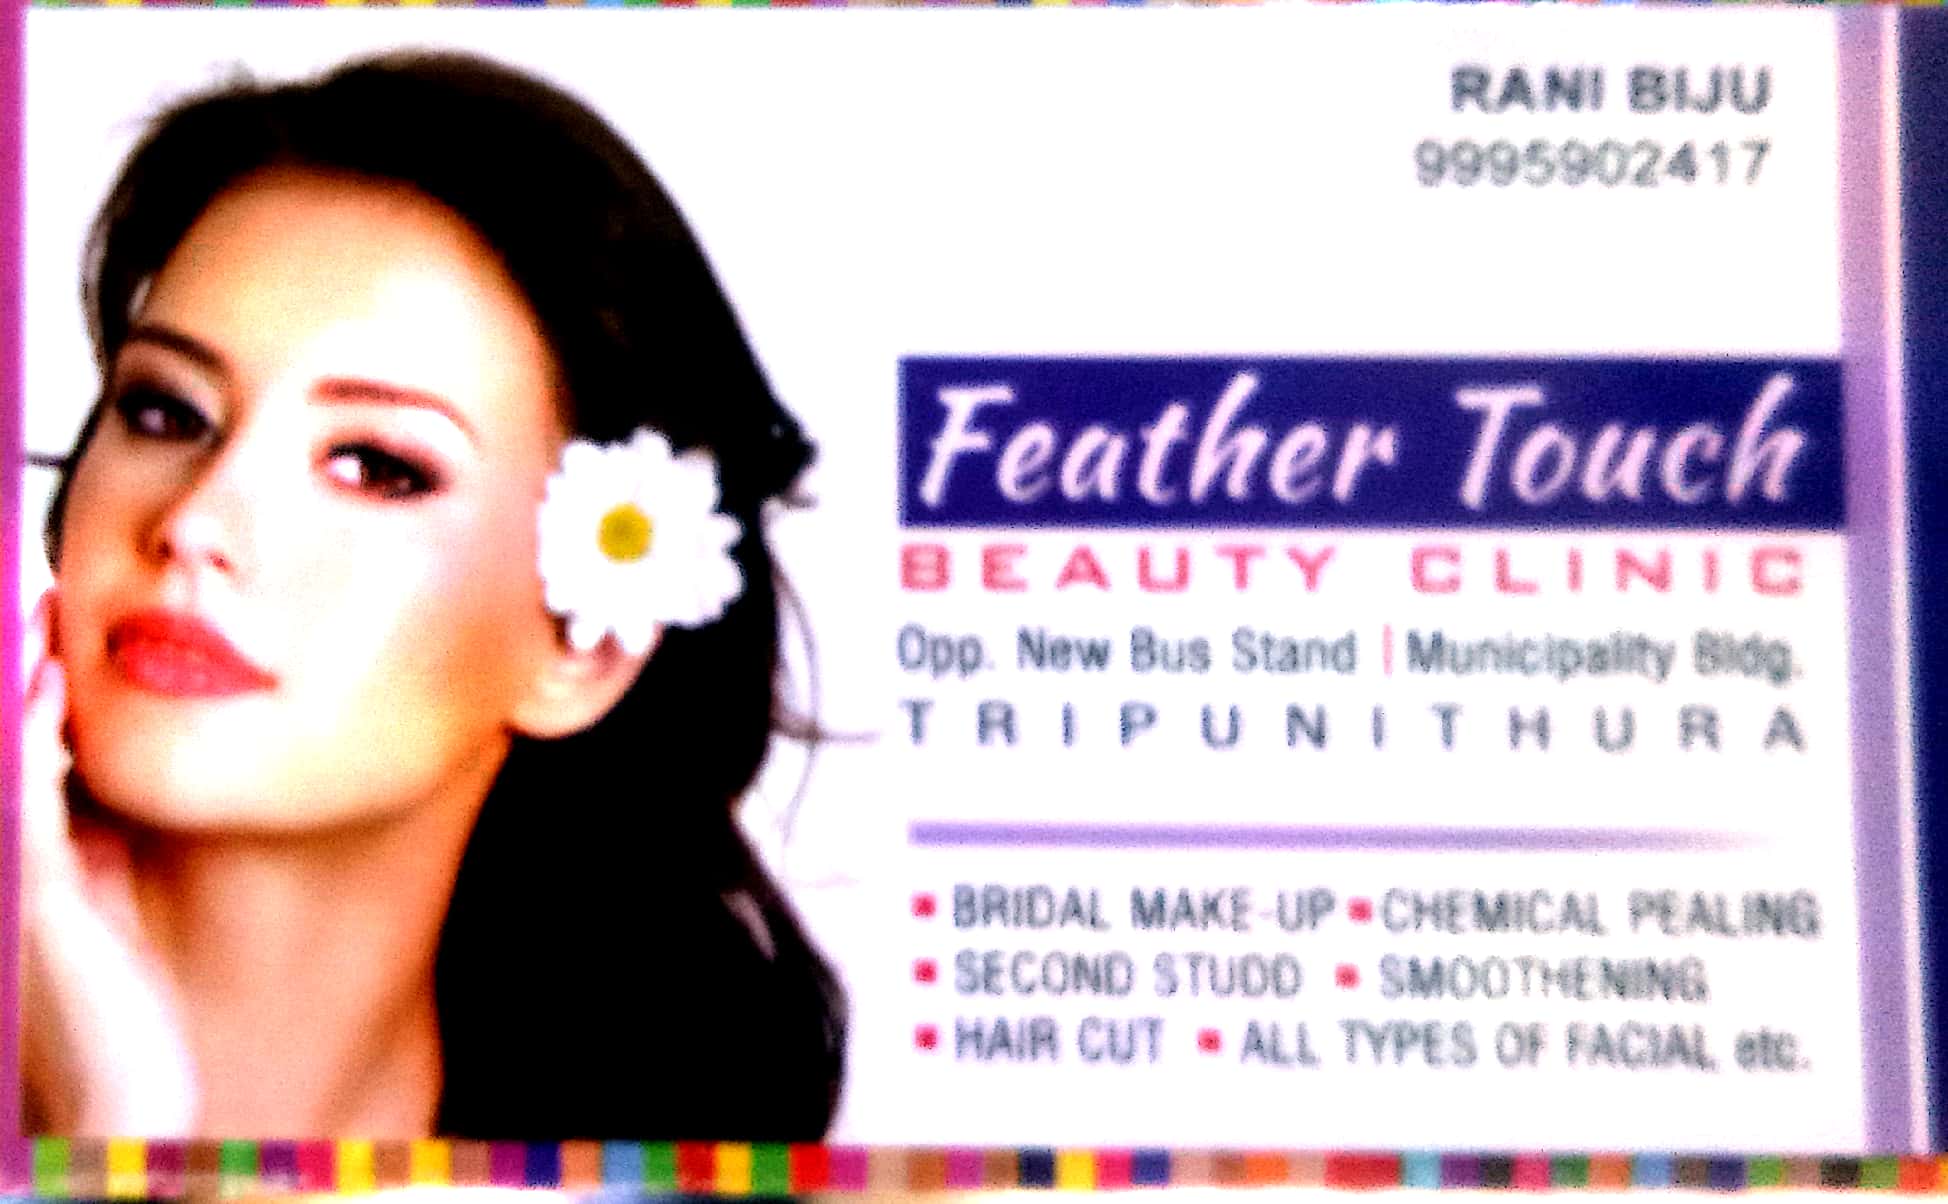 FEATHER TOUCH BEAUTY CLINIC, BEAUTY PARLOUR,  service in Thrippunithura, Ernakulam